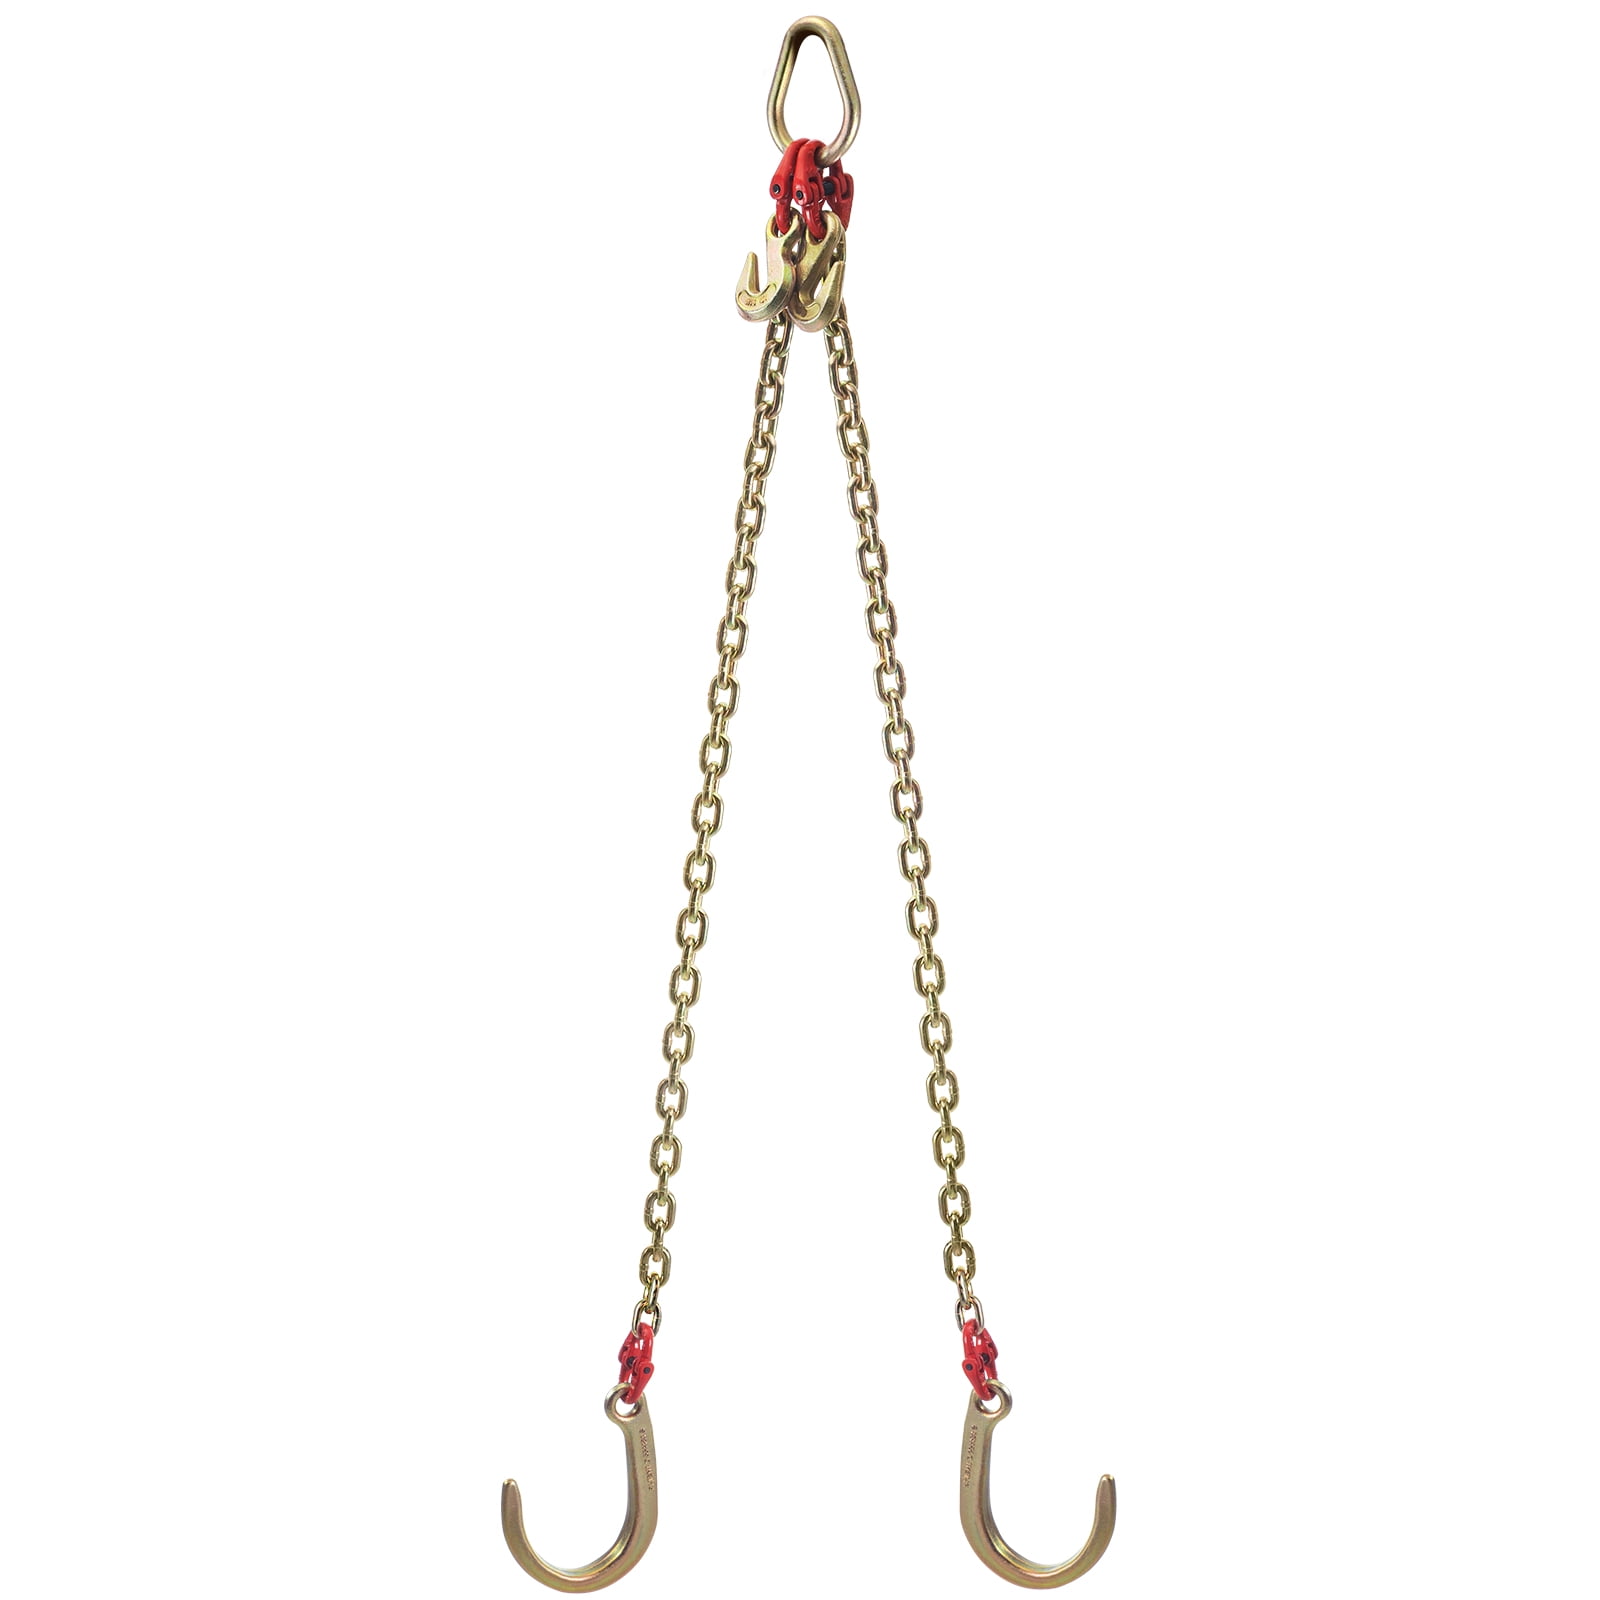 J Hook Chain, 3/8 in x 2 ft Tow Chain Bridle, Grade 80 J Hook